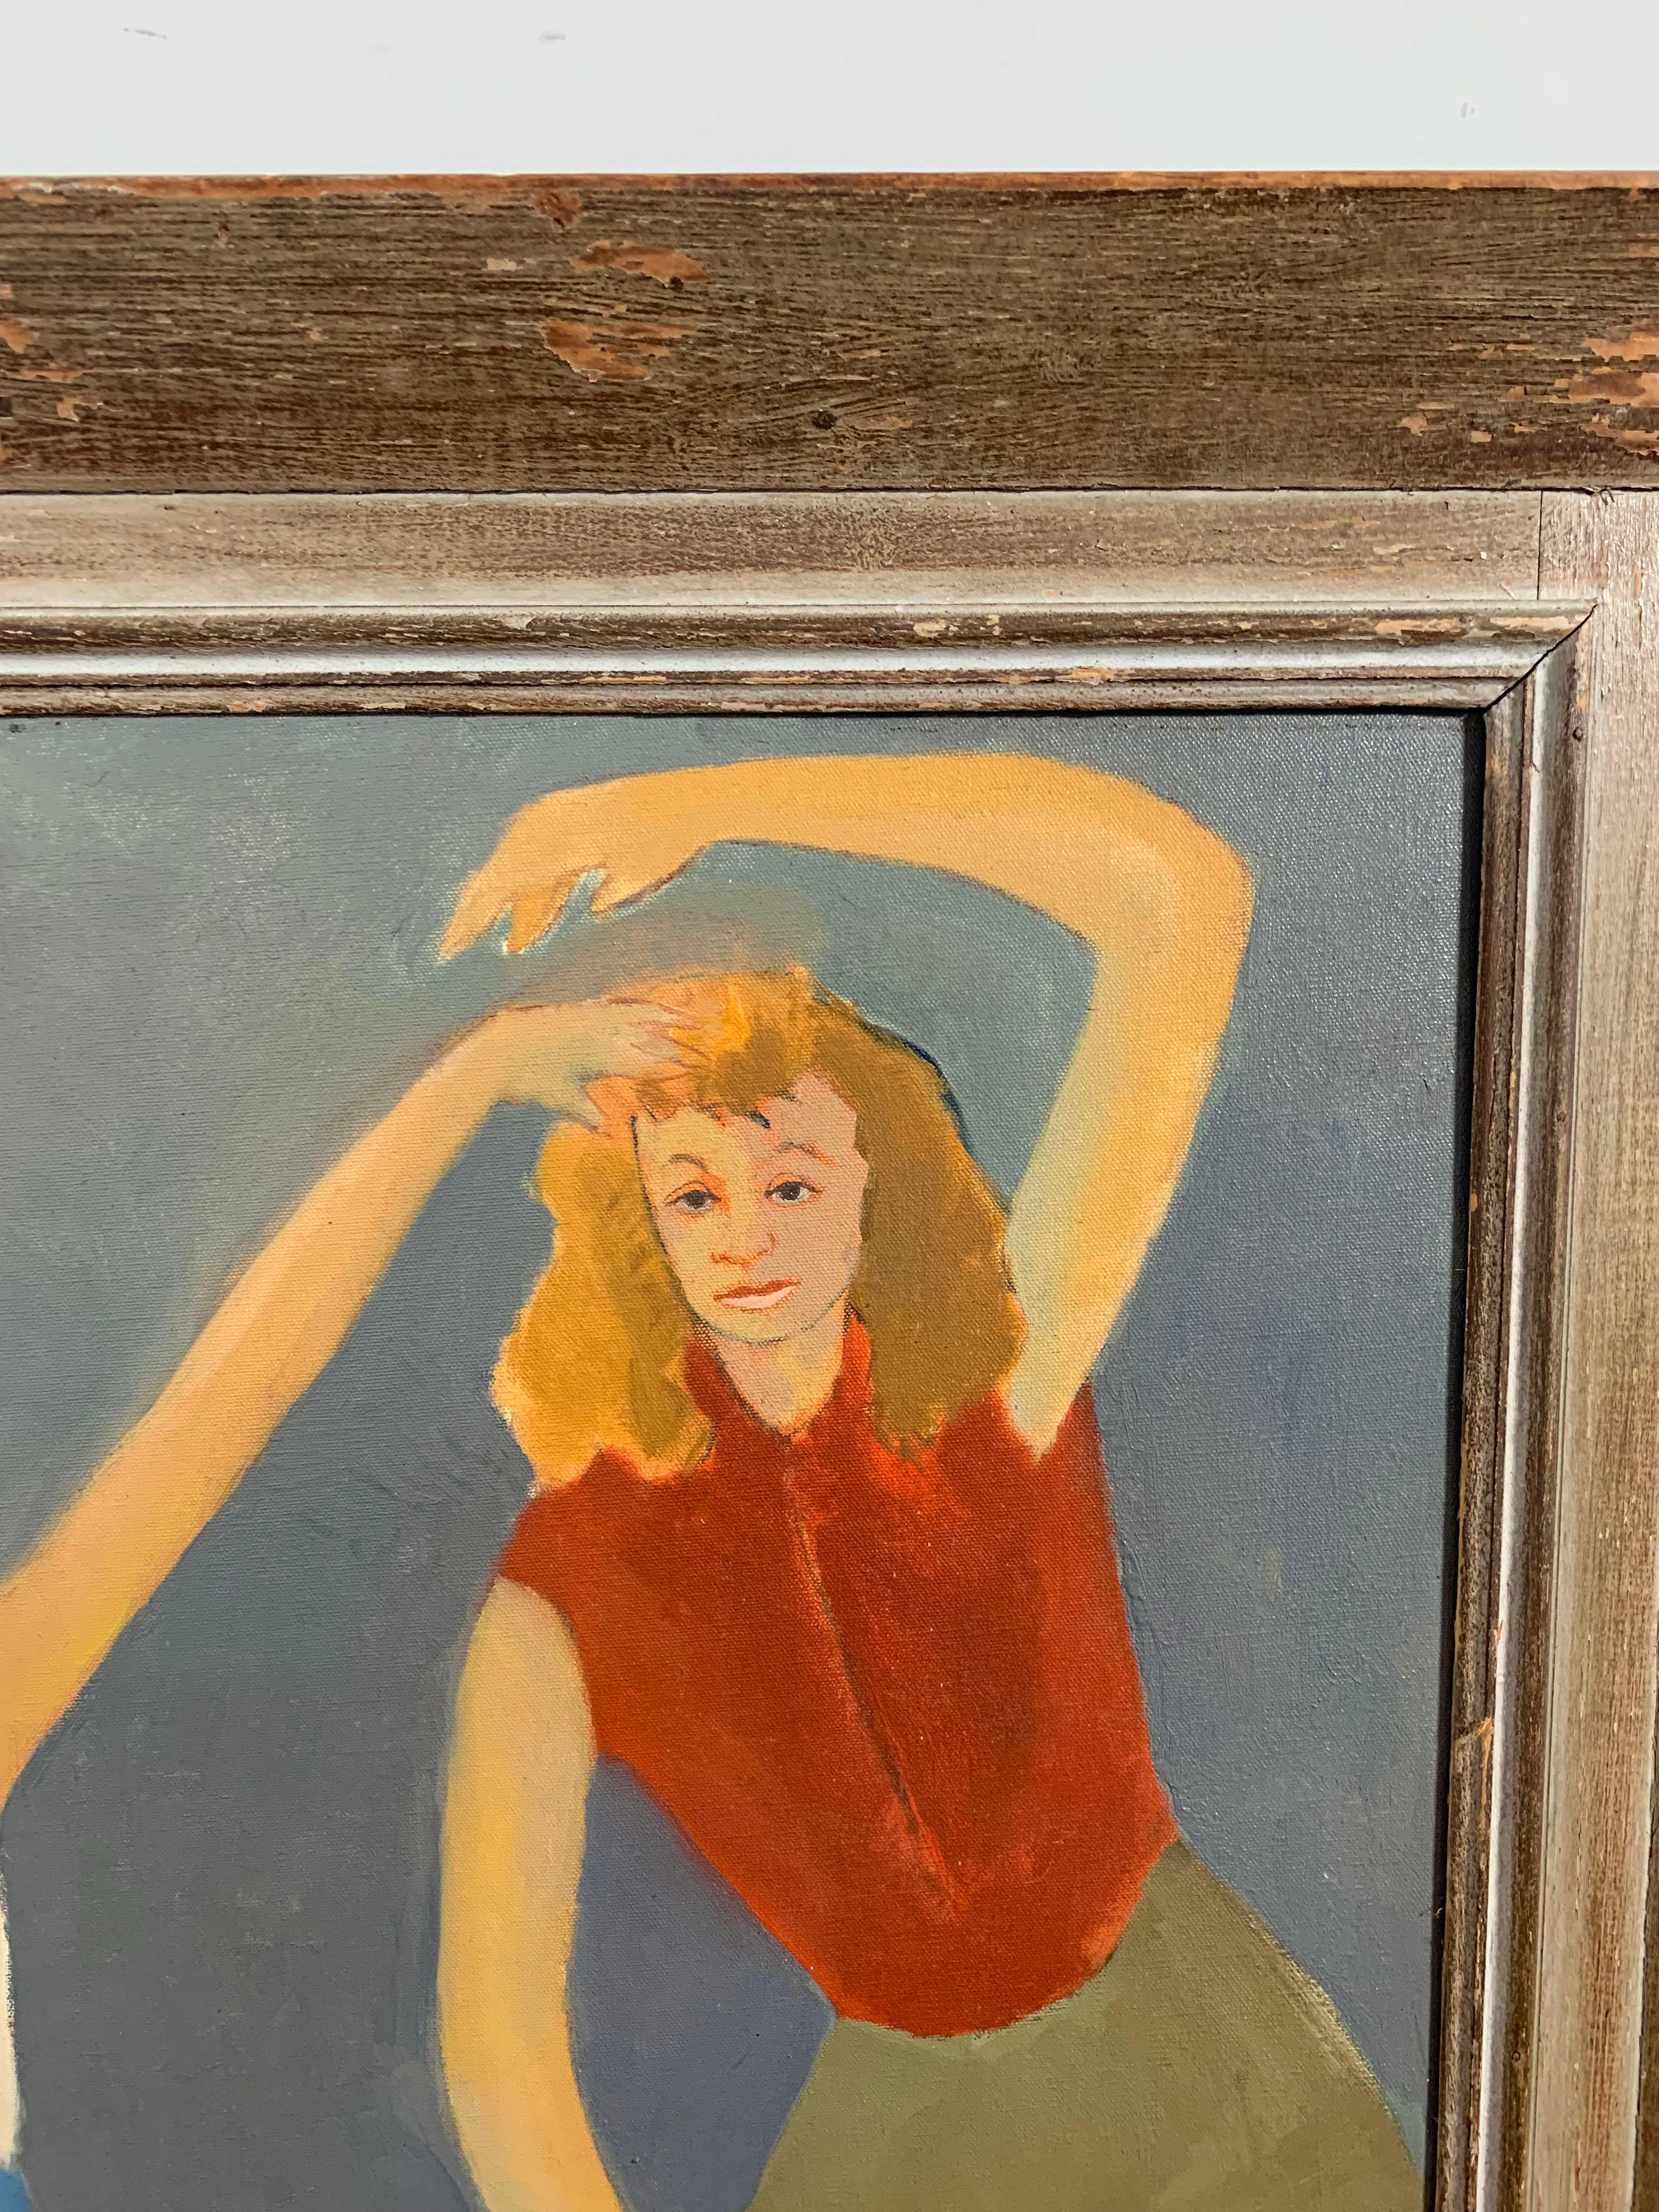 We recently acquired a number of paintings from the estate of Peter Paul Sakowski (1915-2000) of Holyoke, Mass. His style tended to vary from an illustrative graphic quality to the more fractured cubism he adopted during the 1950s and 60s. He was at